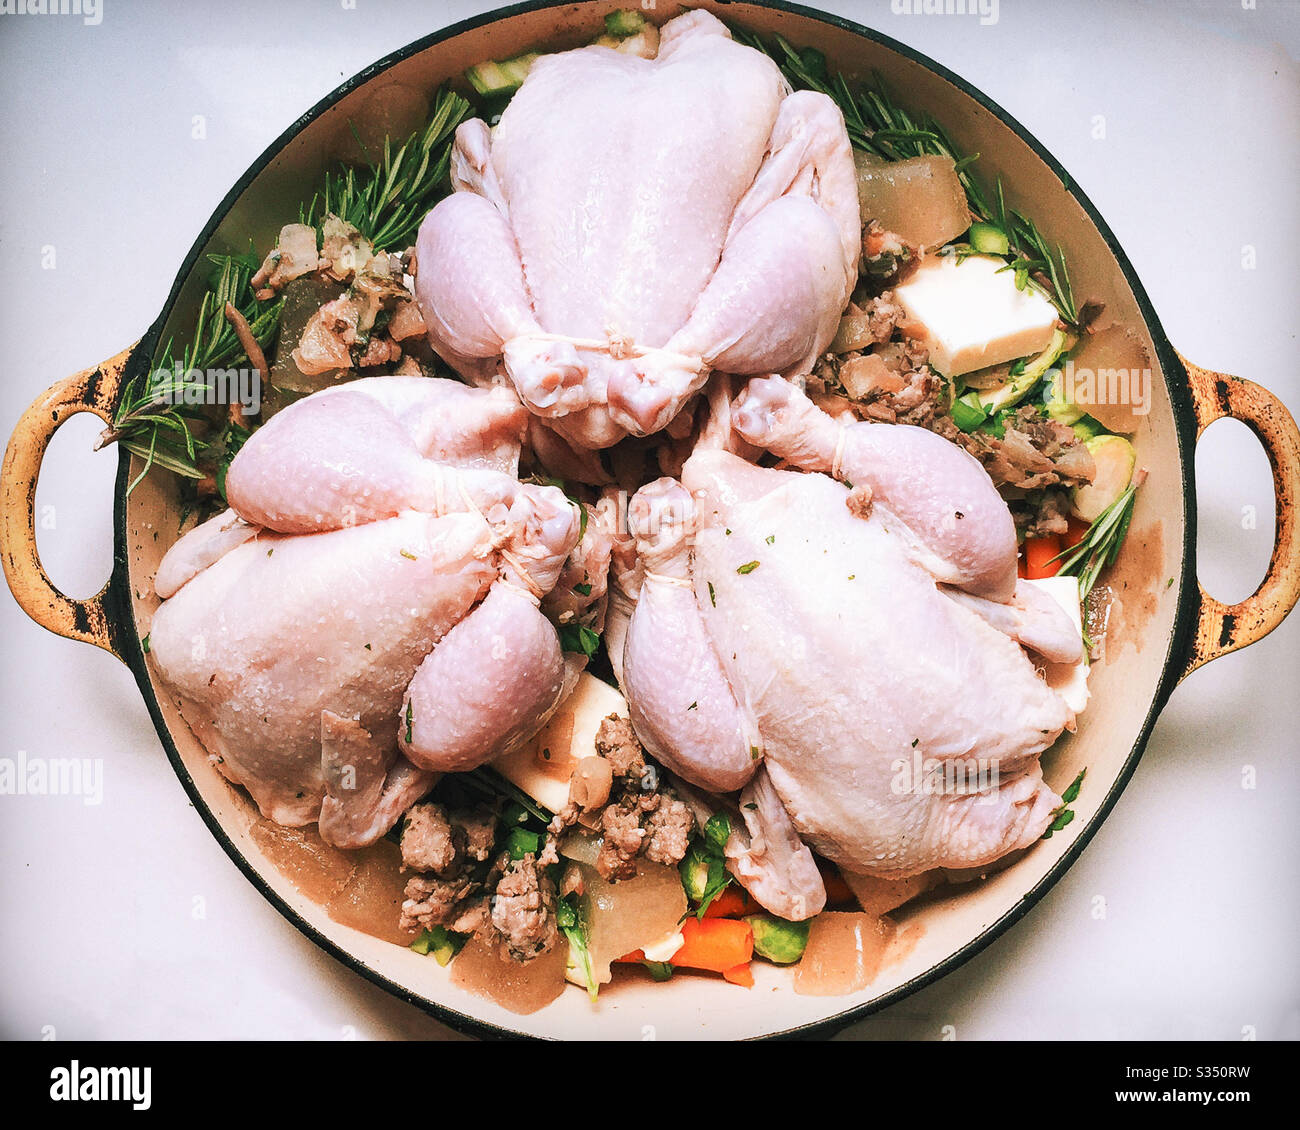 Cornish Hens, Raw and Prepared for Cooking Stock Photo